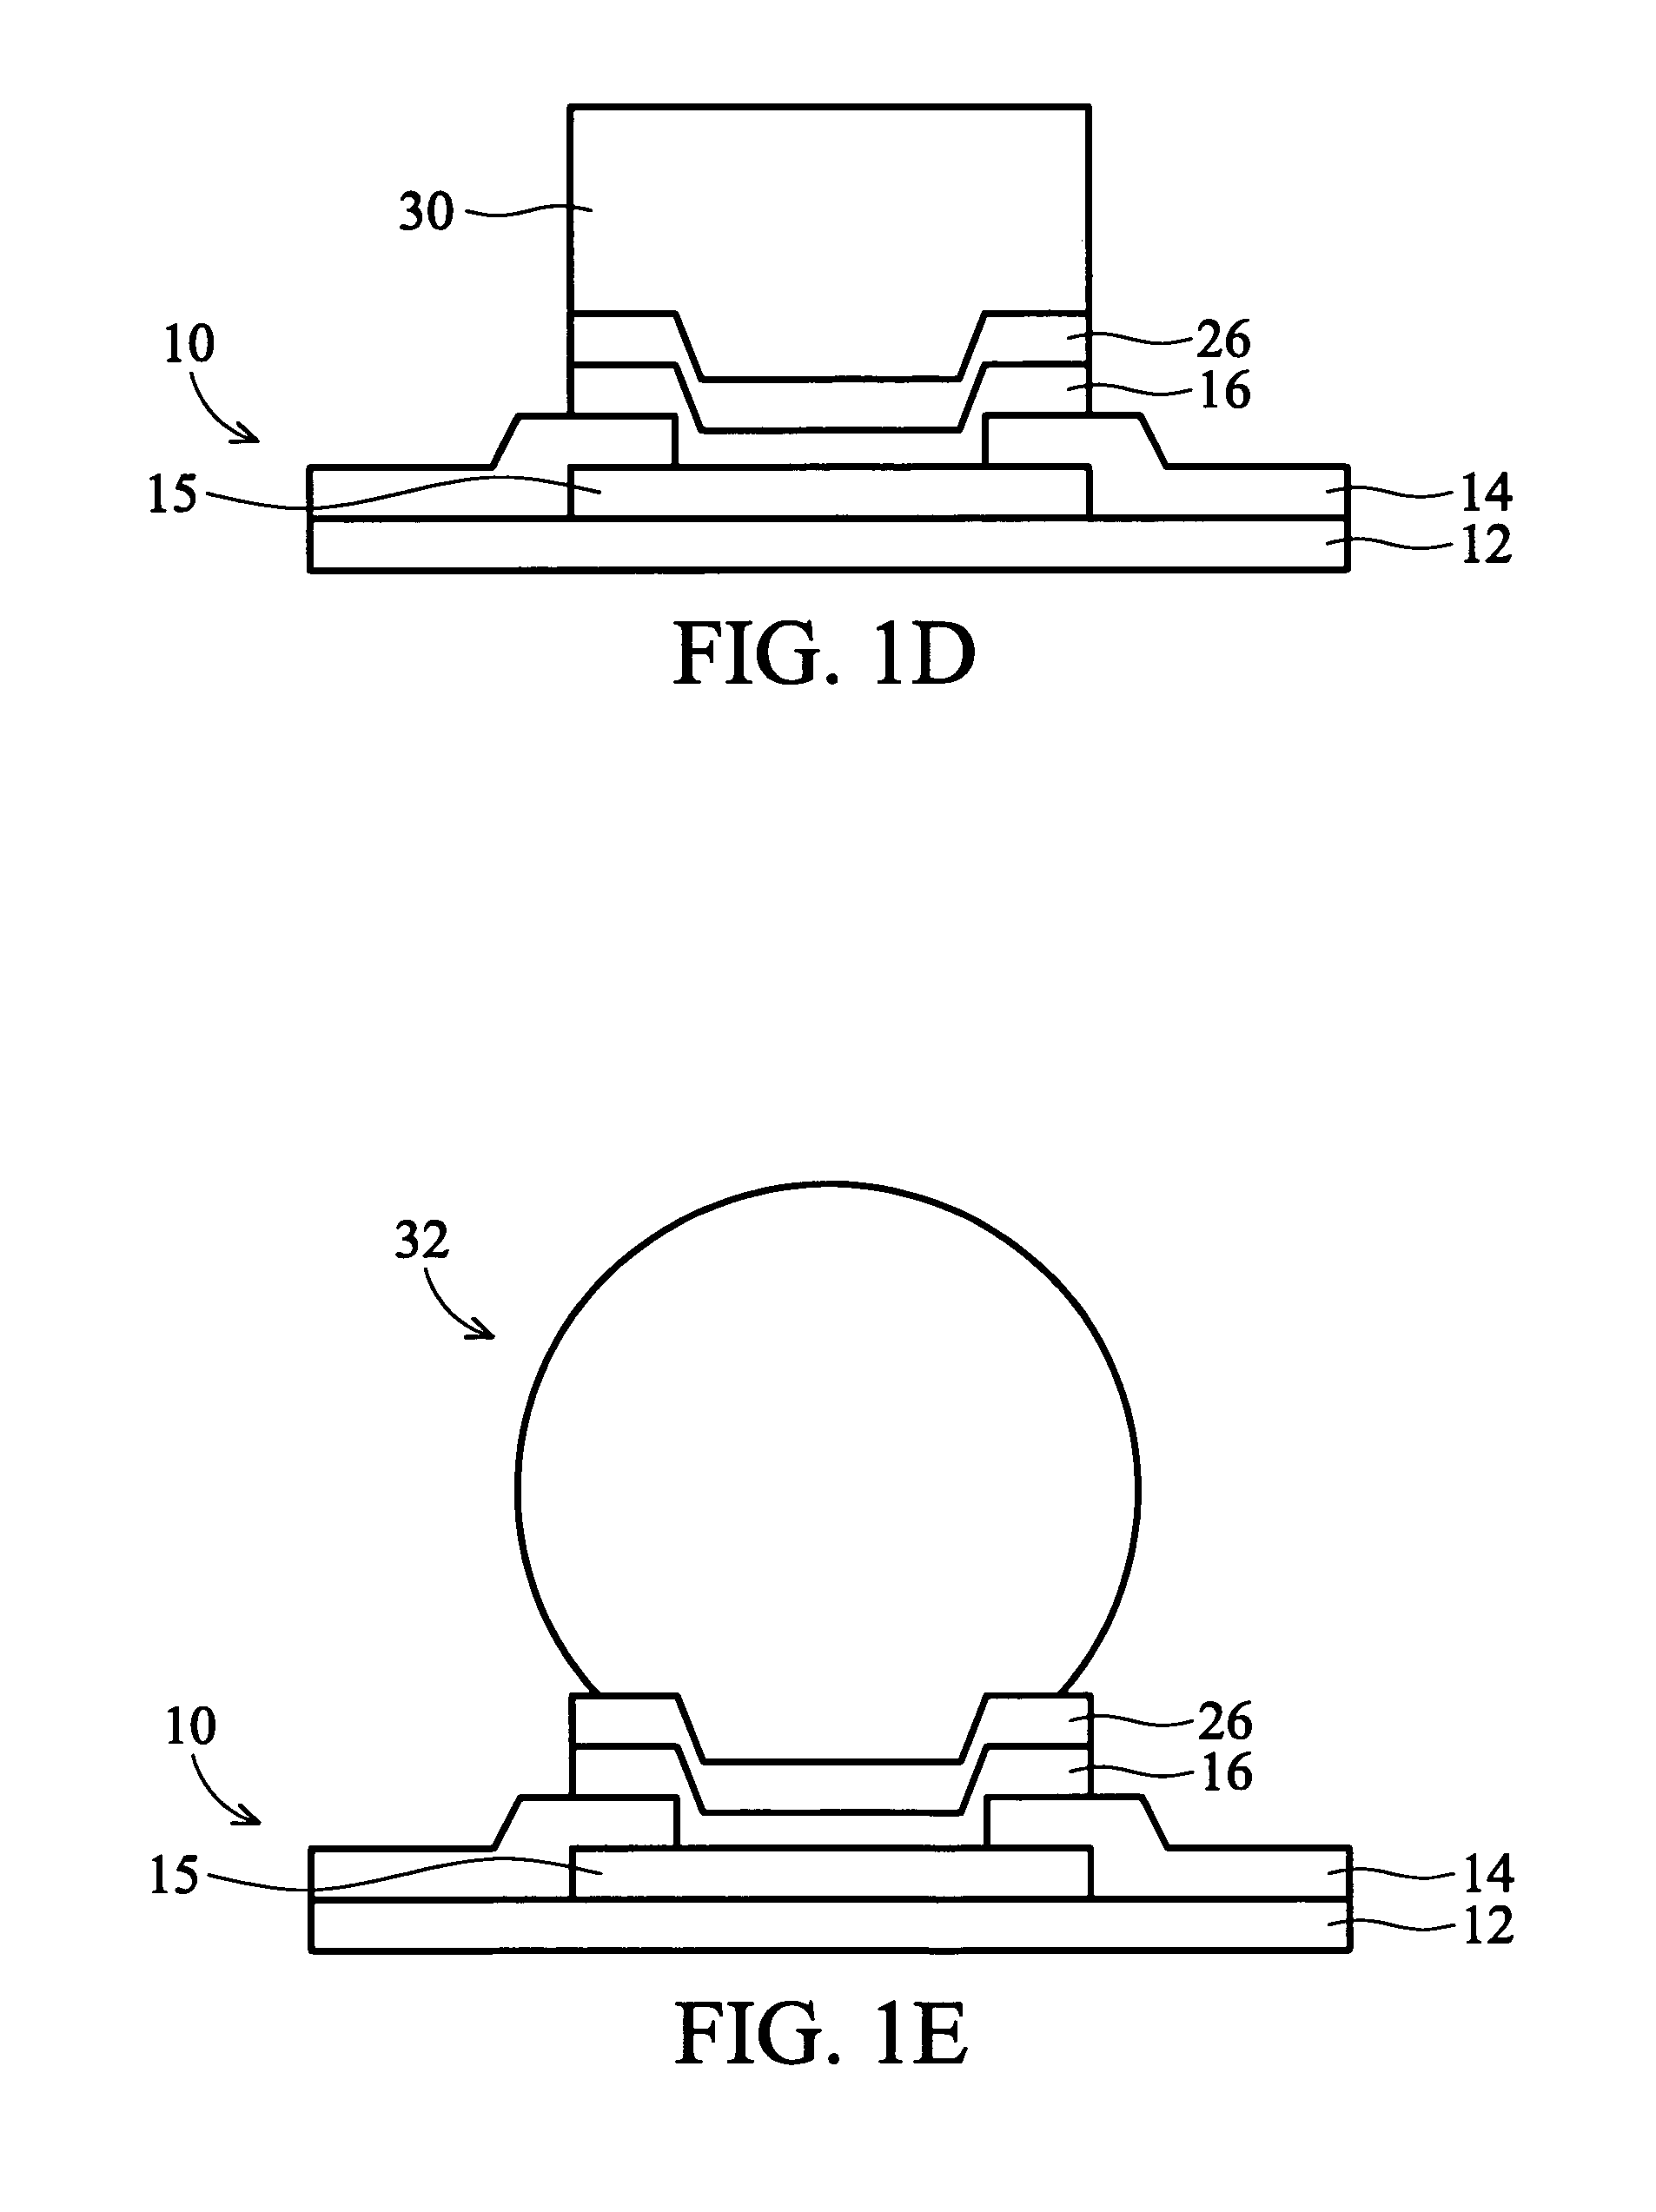 Method to increase bump height and achieve robust bump structure